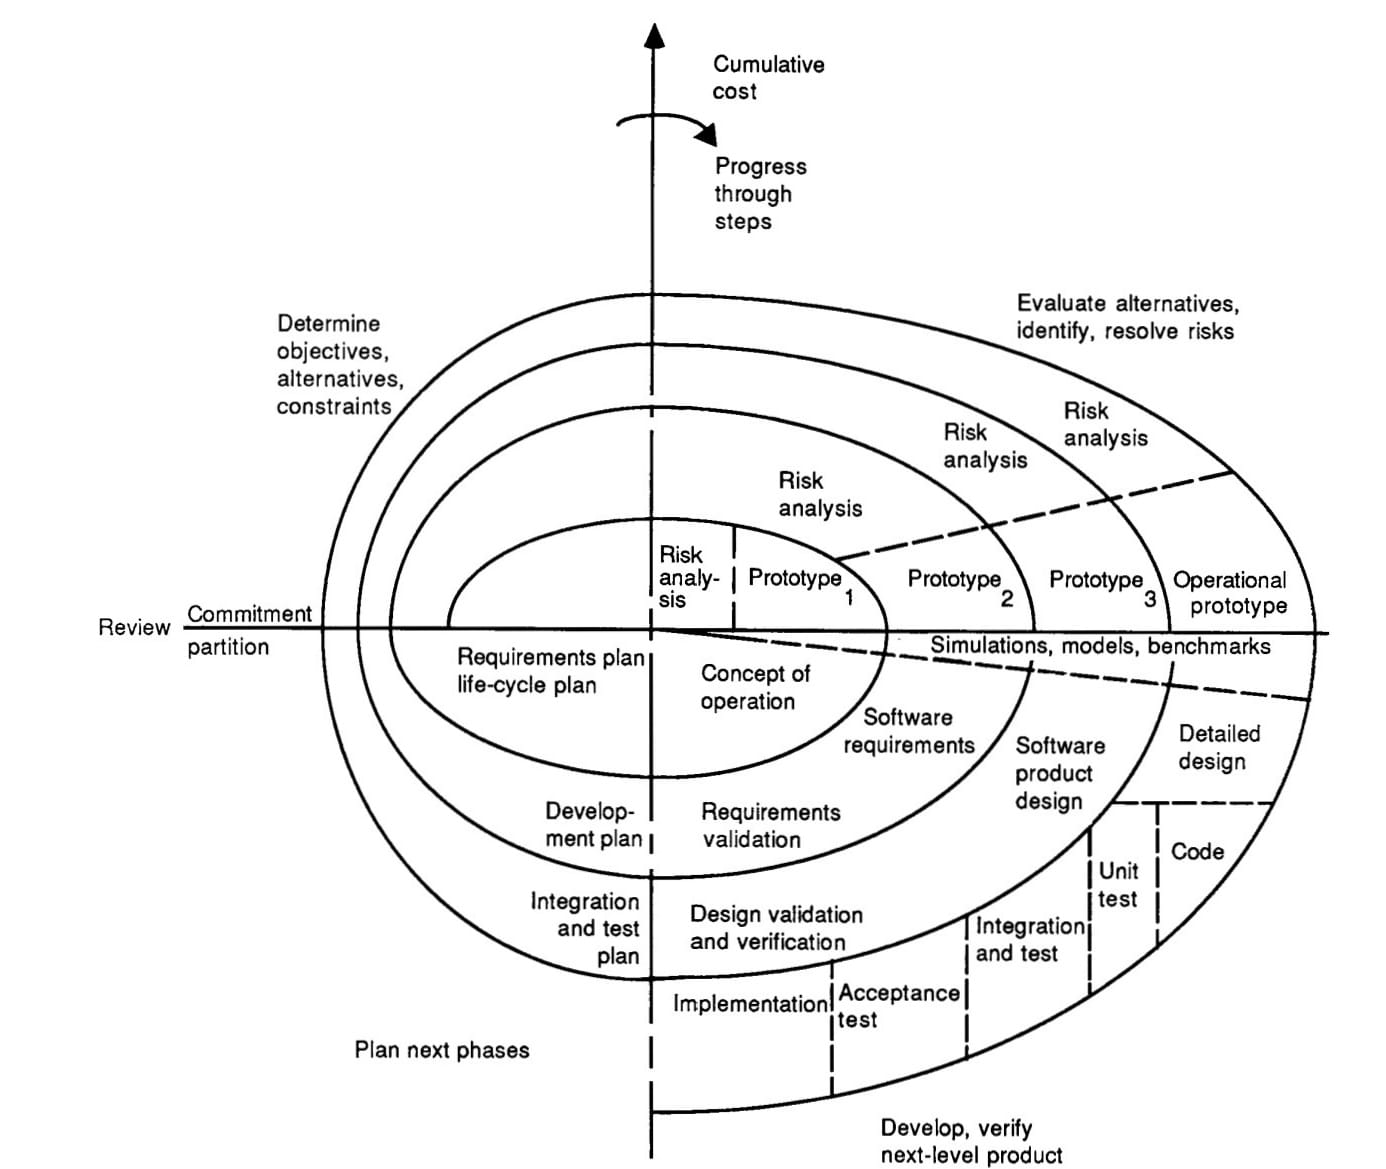 The radial and quadrant of the Spiral Model